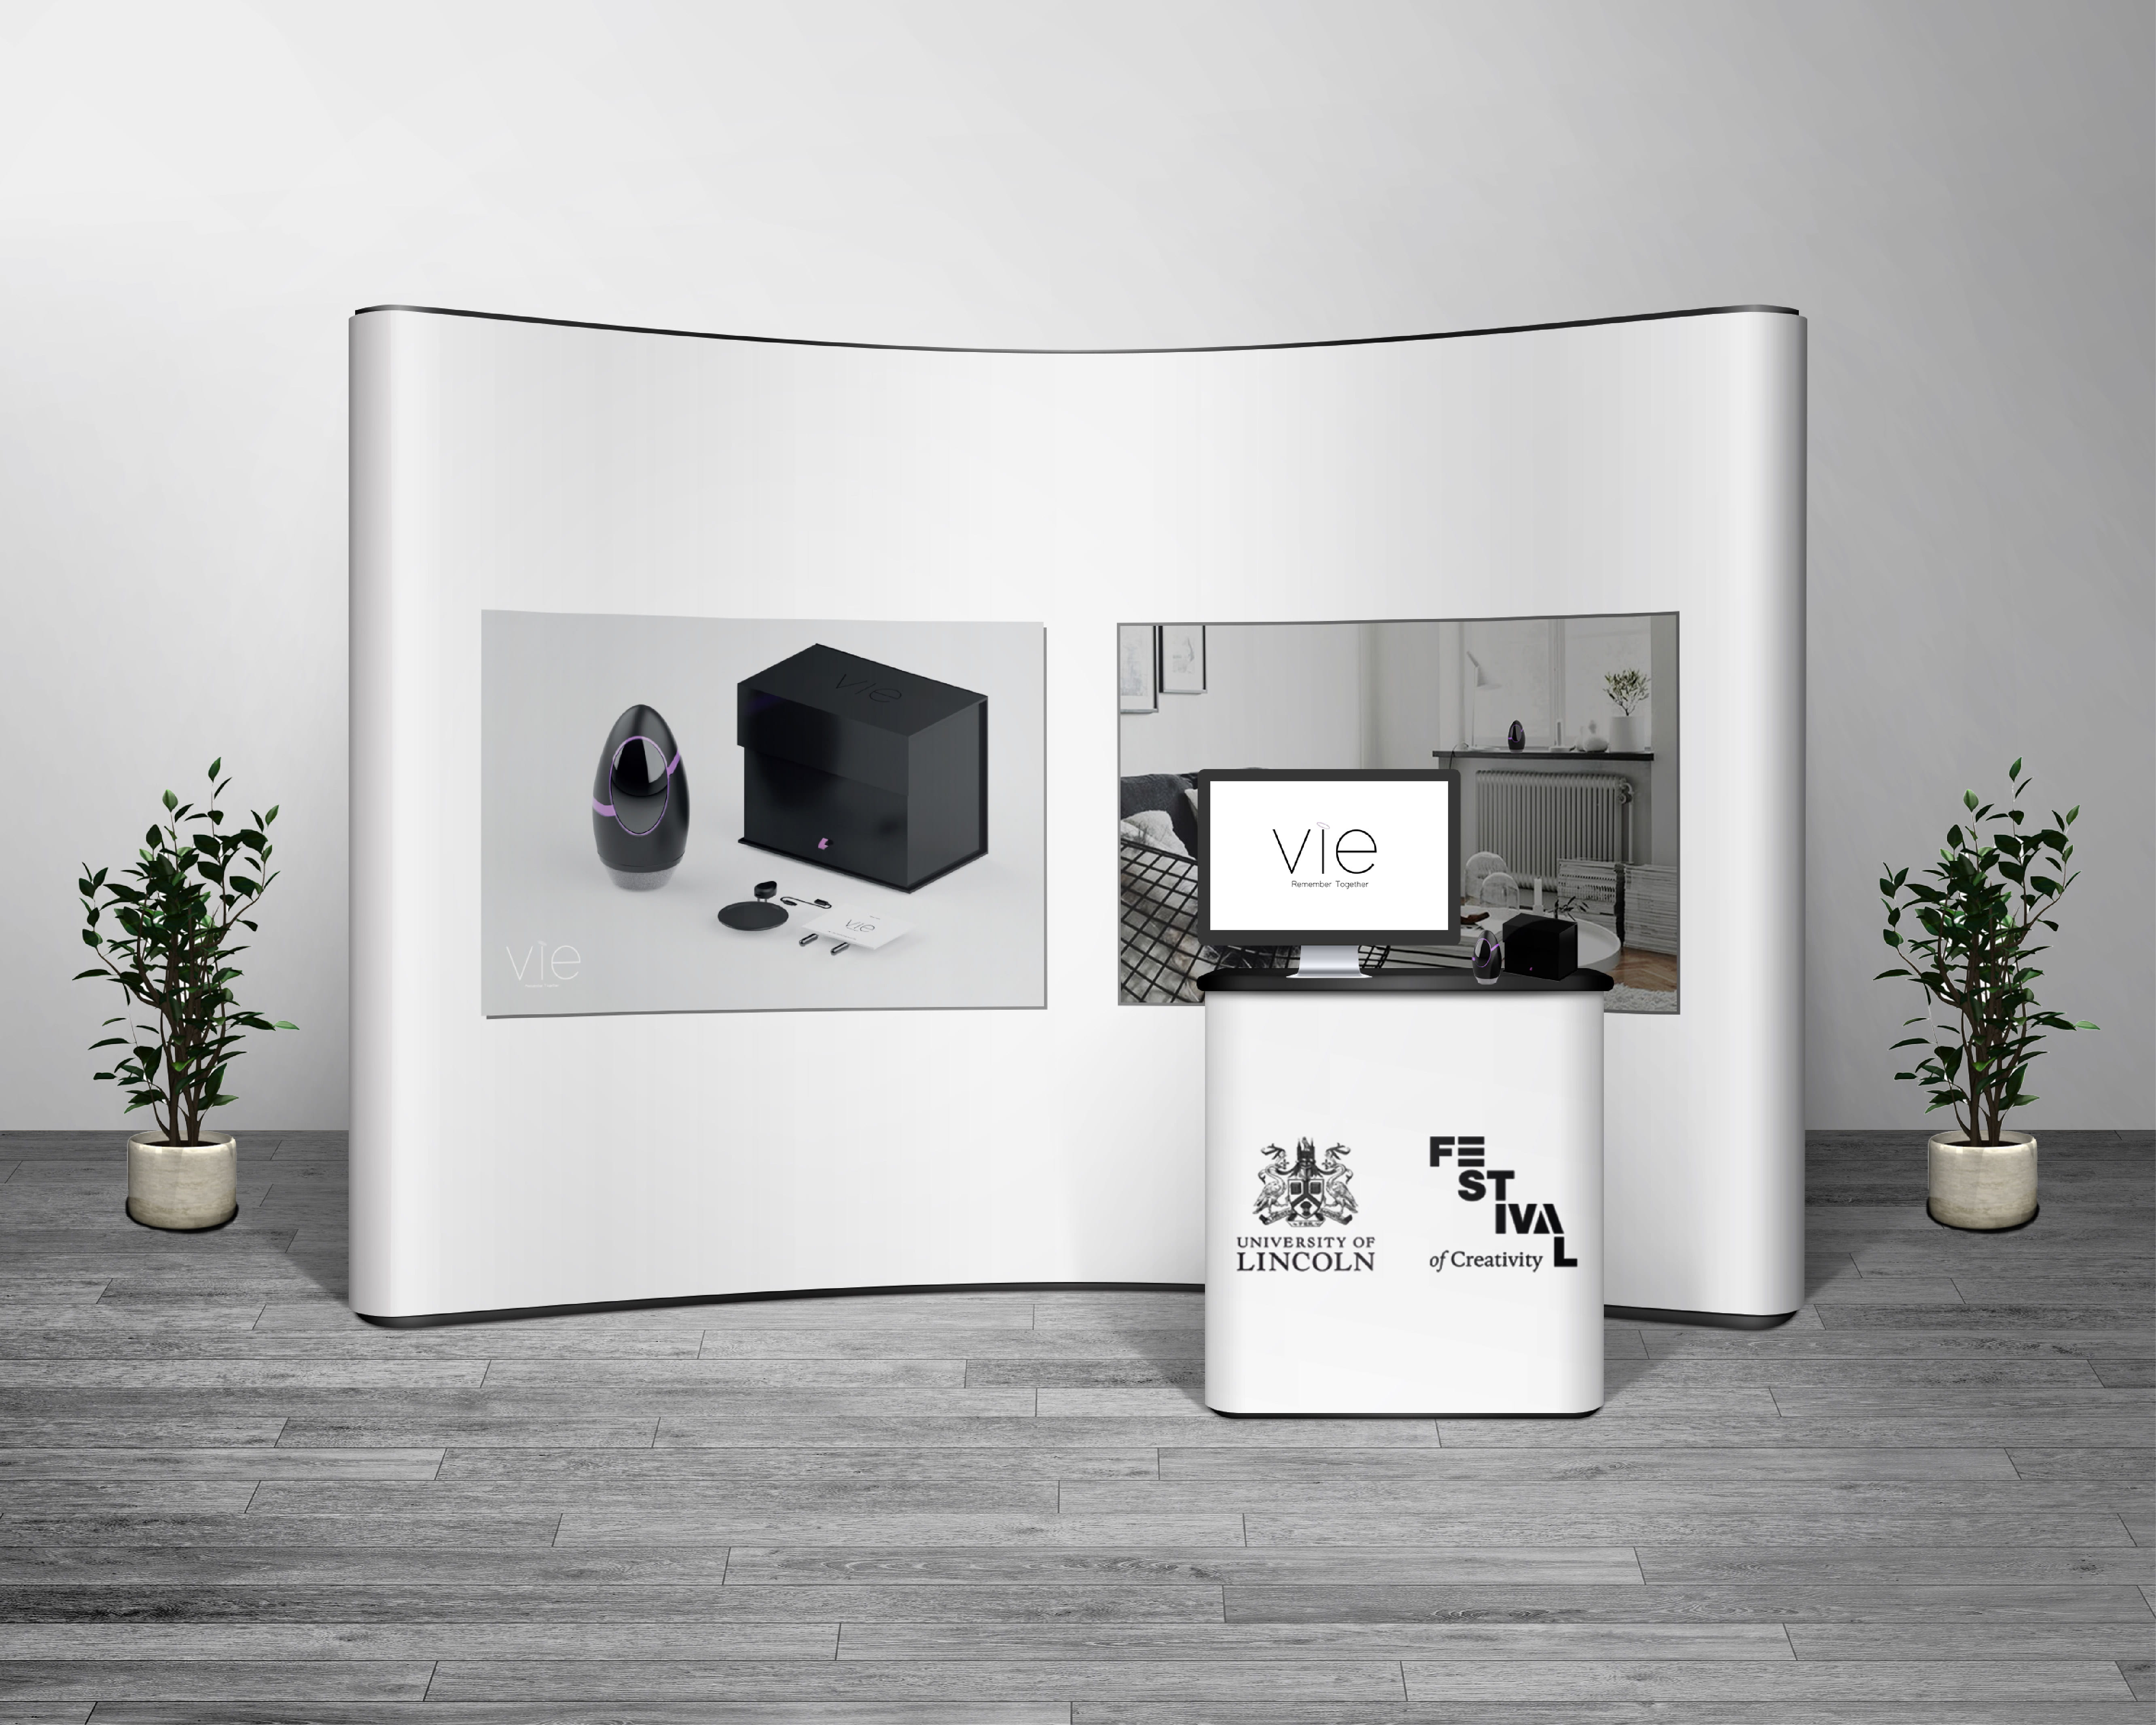 Image demonstrates showcase stand displaying the Urn and supporting materials.